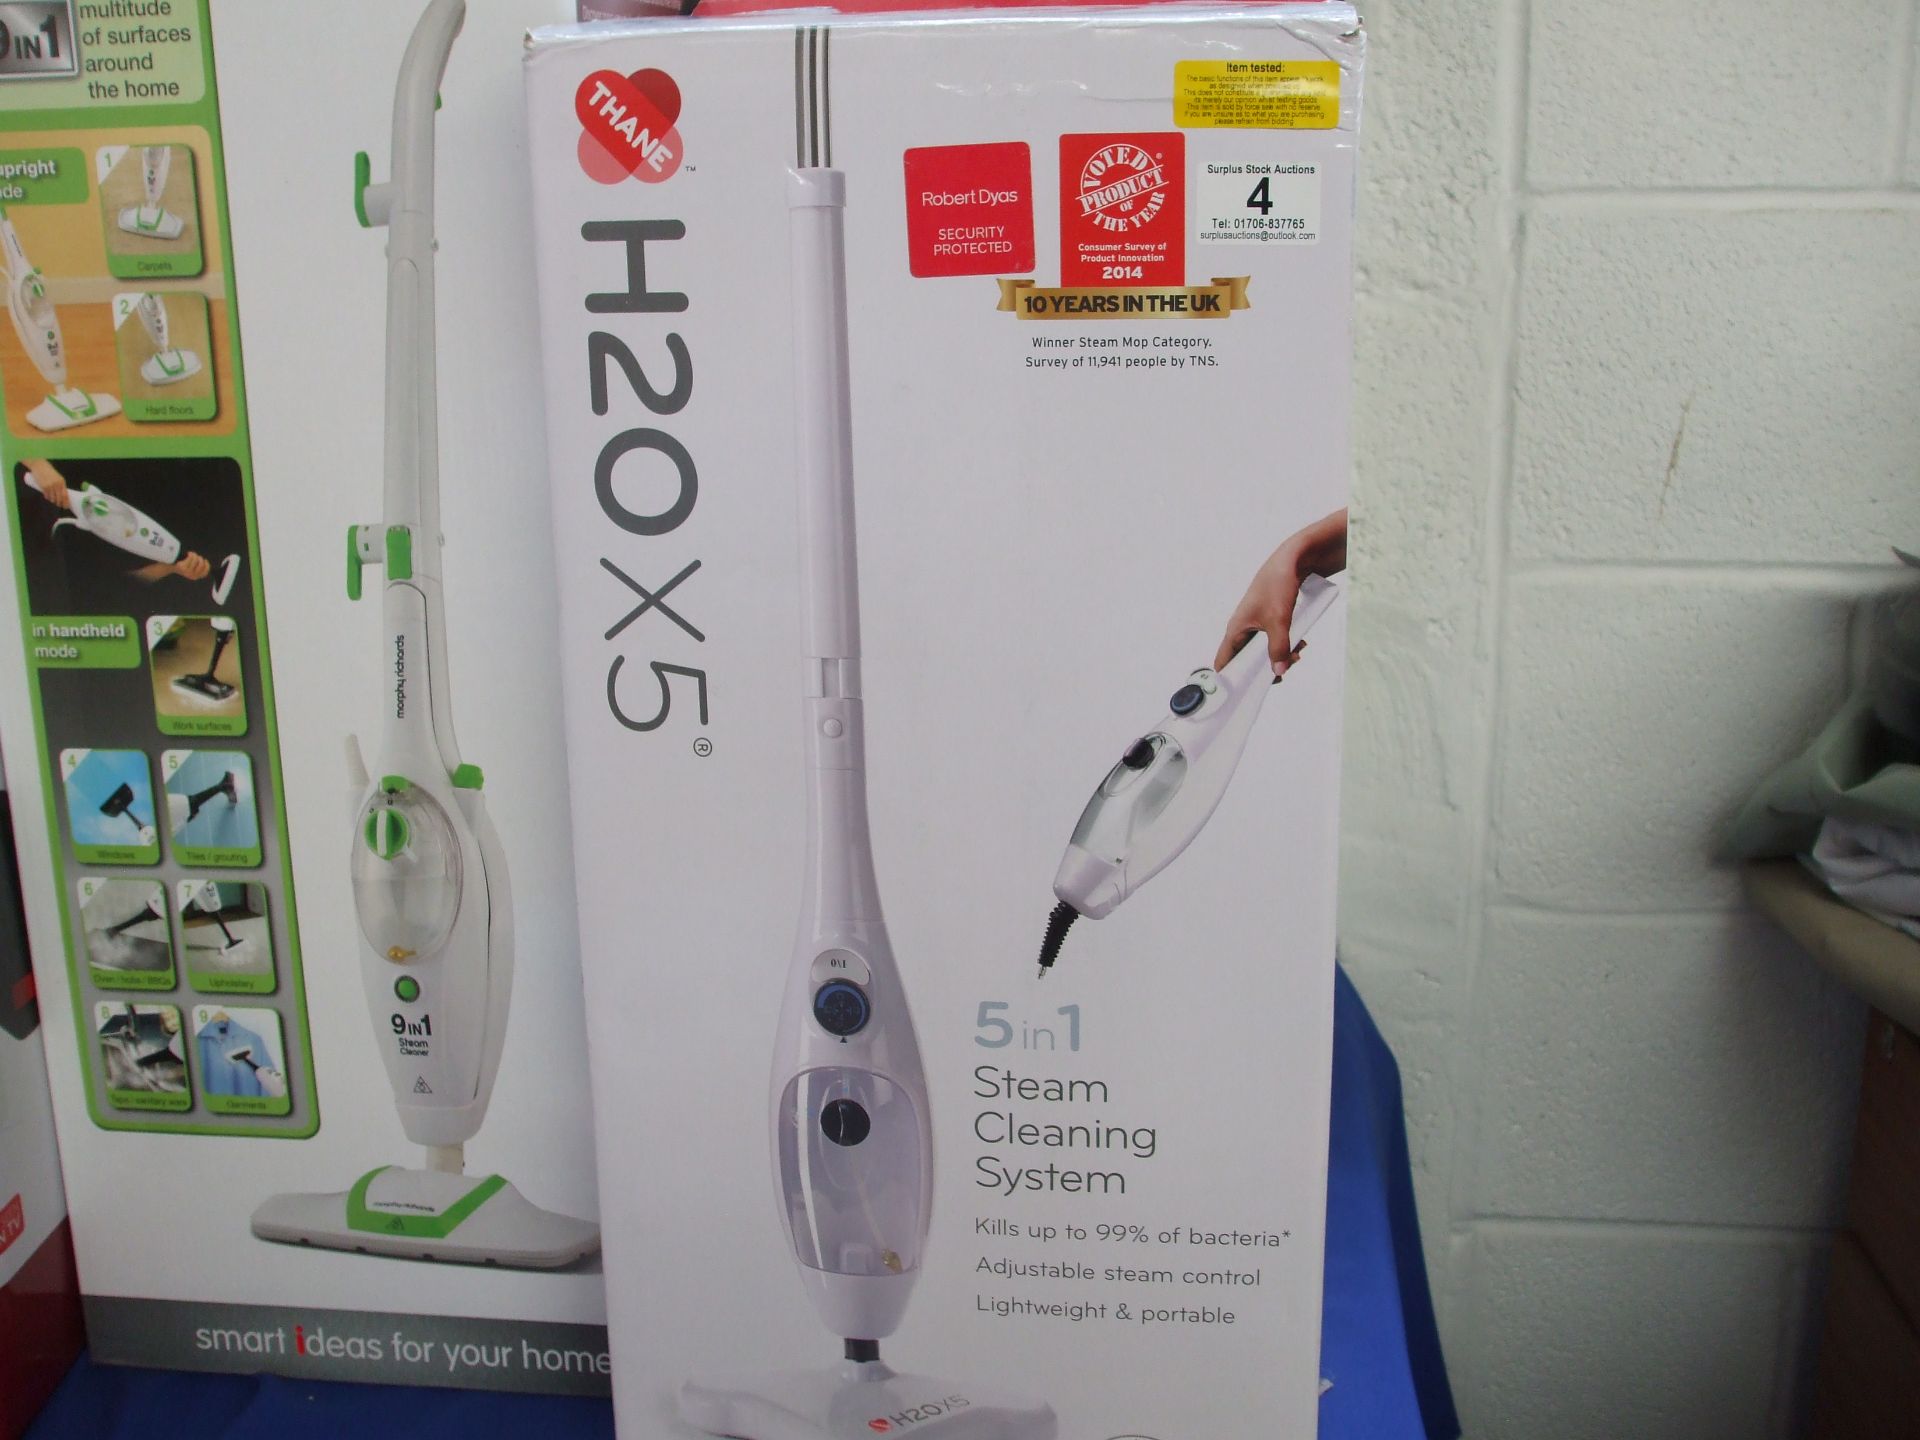 H2O X5 5 in 1 Steam Cleaner (boxed & Tested)